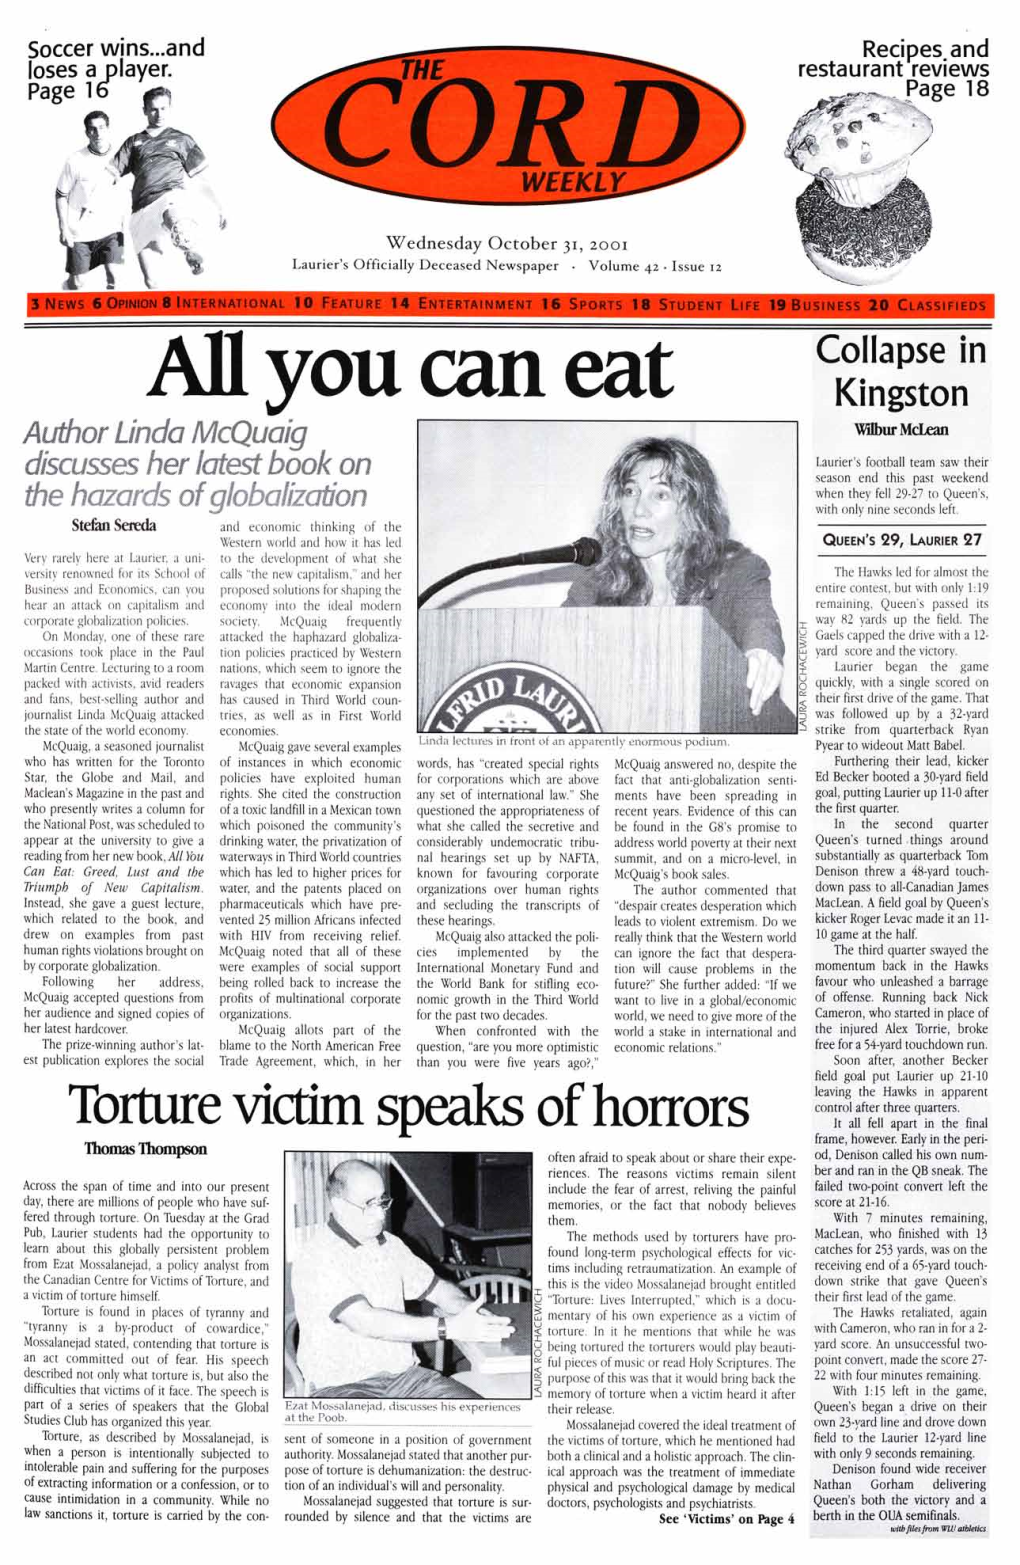 The Cord Weekly (October 31, 2001)